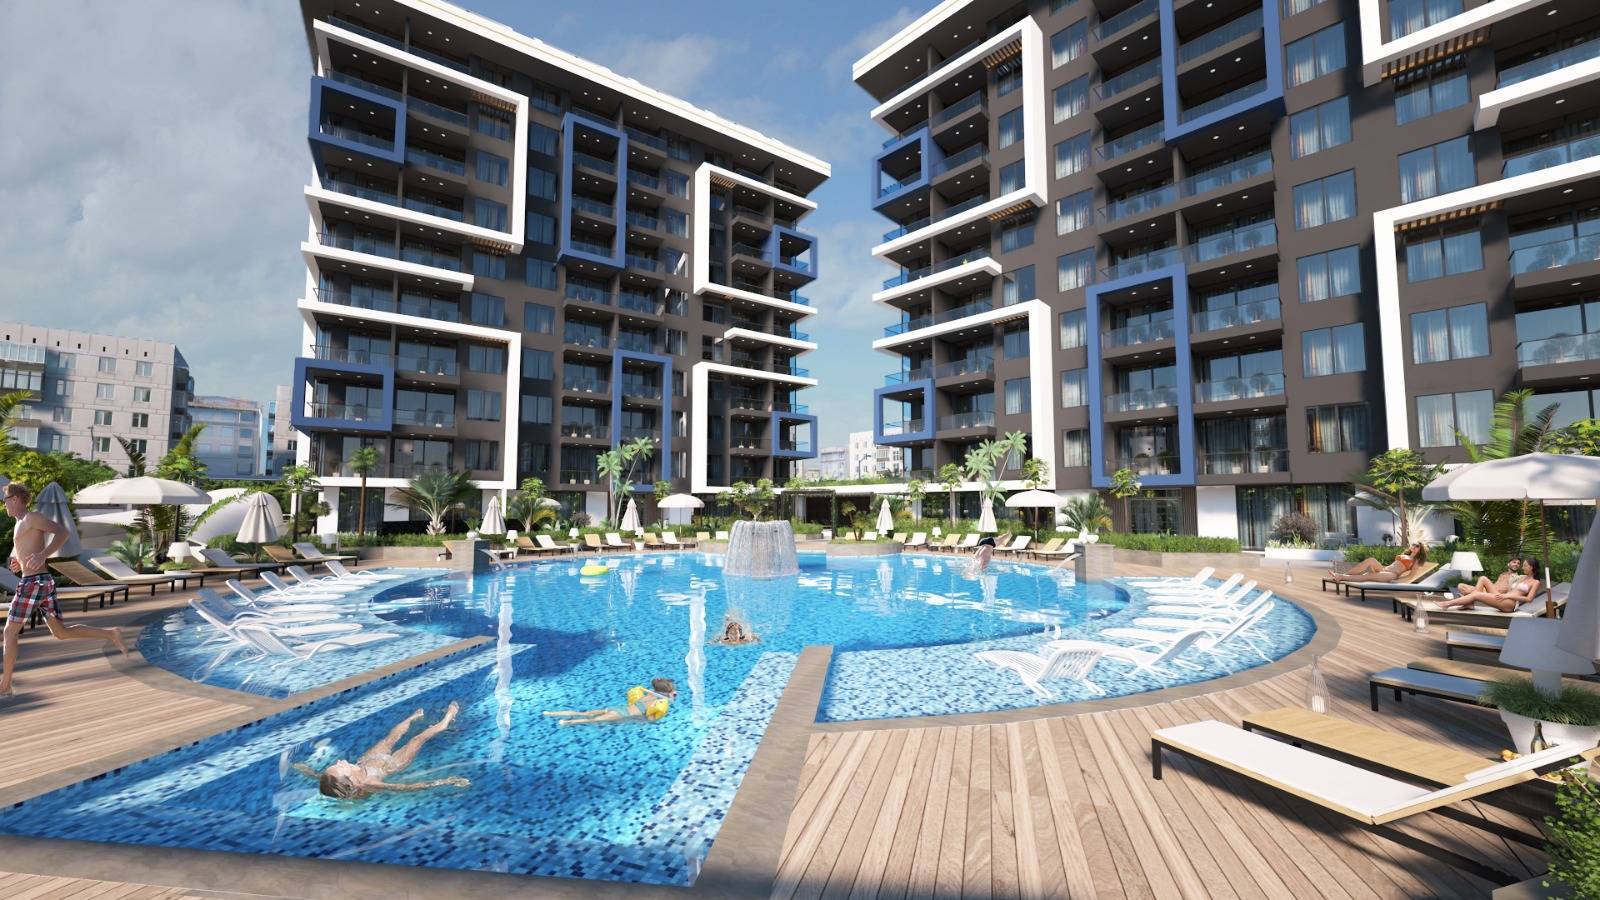 New apartments for sale in Turkey - Alanya city center